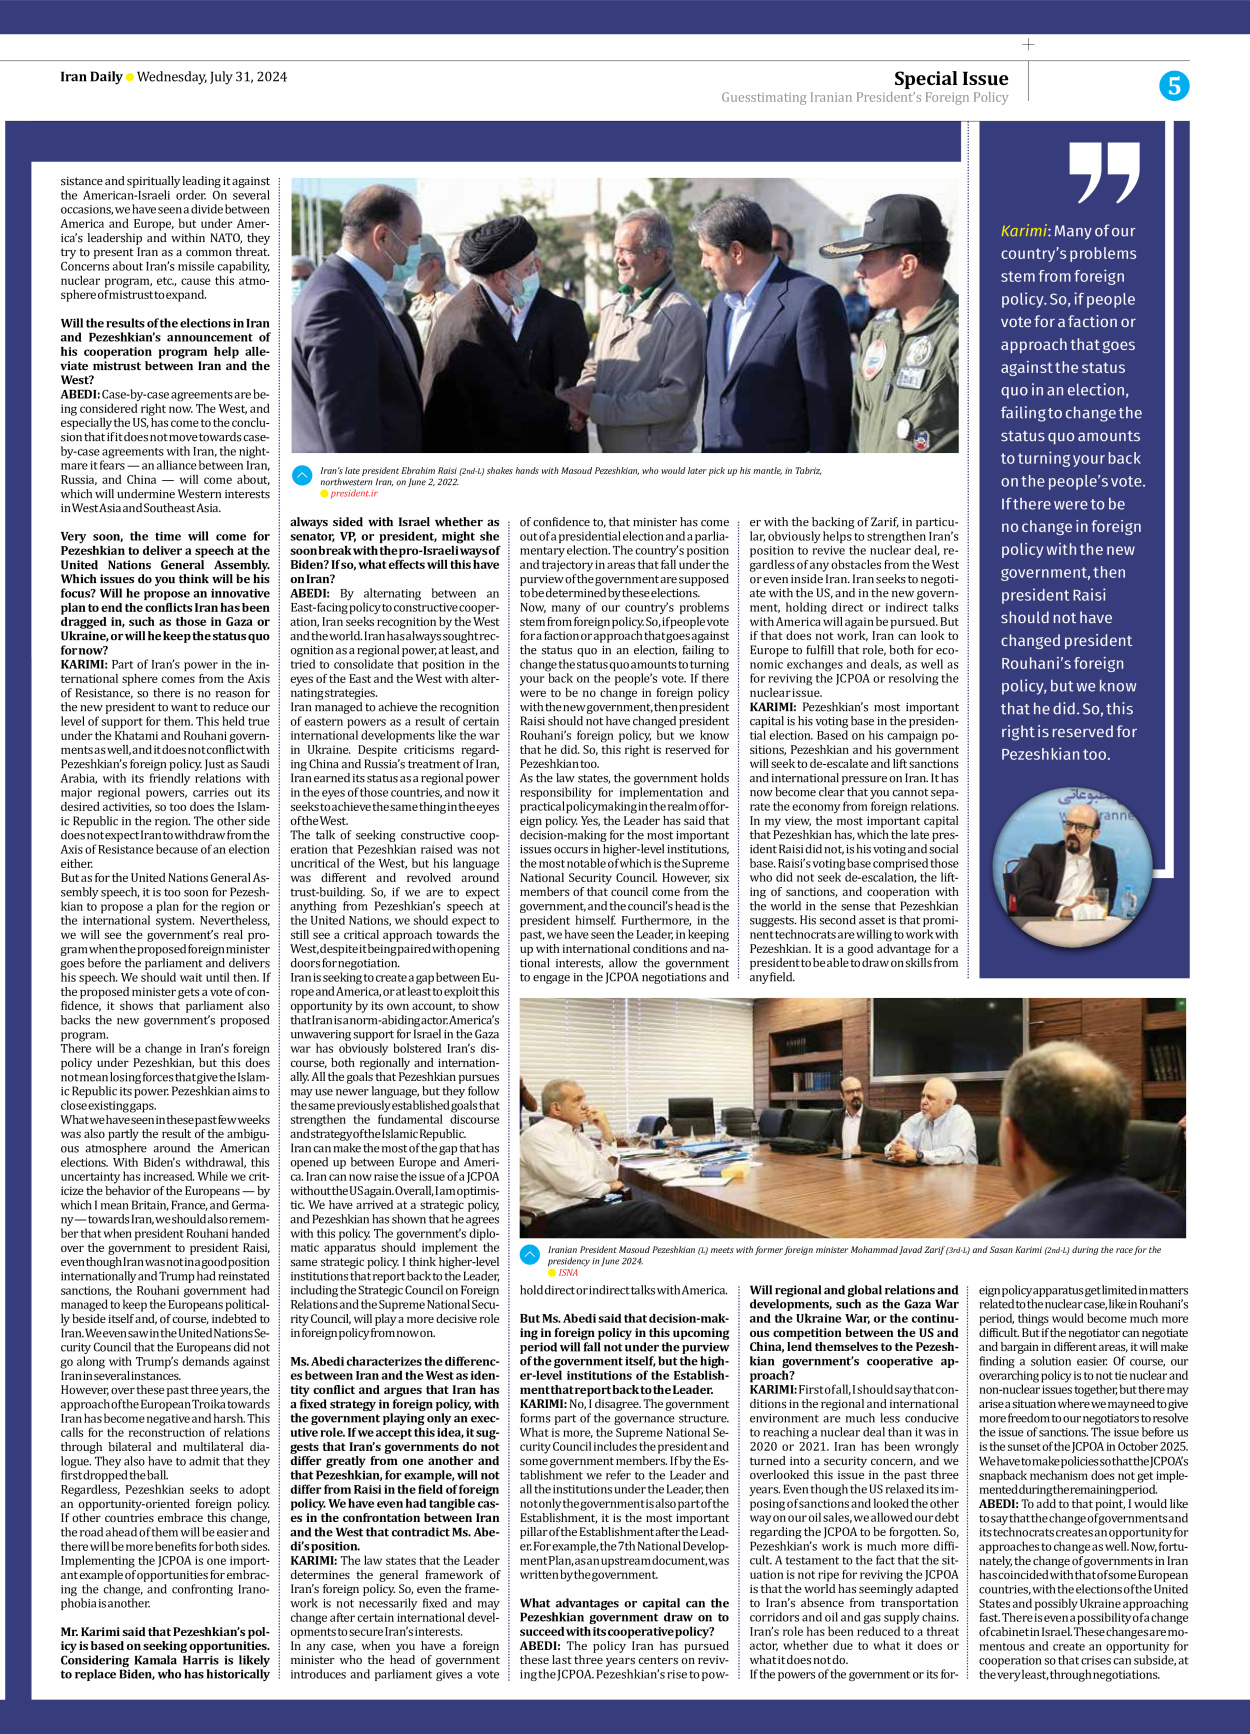 Iran Daily - Number Seven Thousand Six Hundred and Sixteen - 31 July 2024 - Page 5